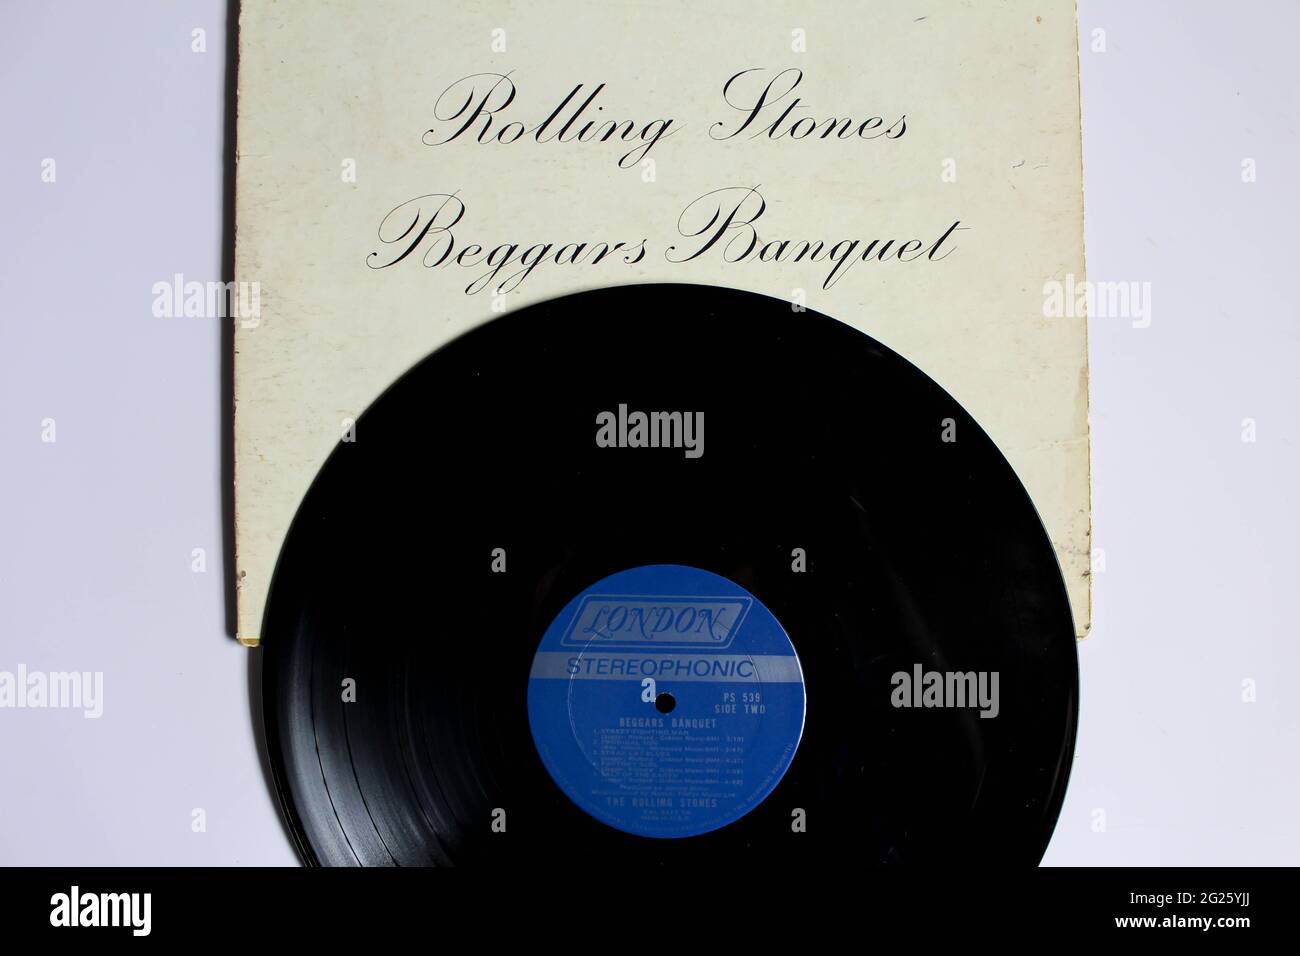 English rock band, The Rolling Stones music album on vinyl record LP disc.  Titled: Beggars Banquet album cover Stock Photo - Alamy